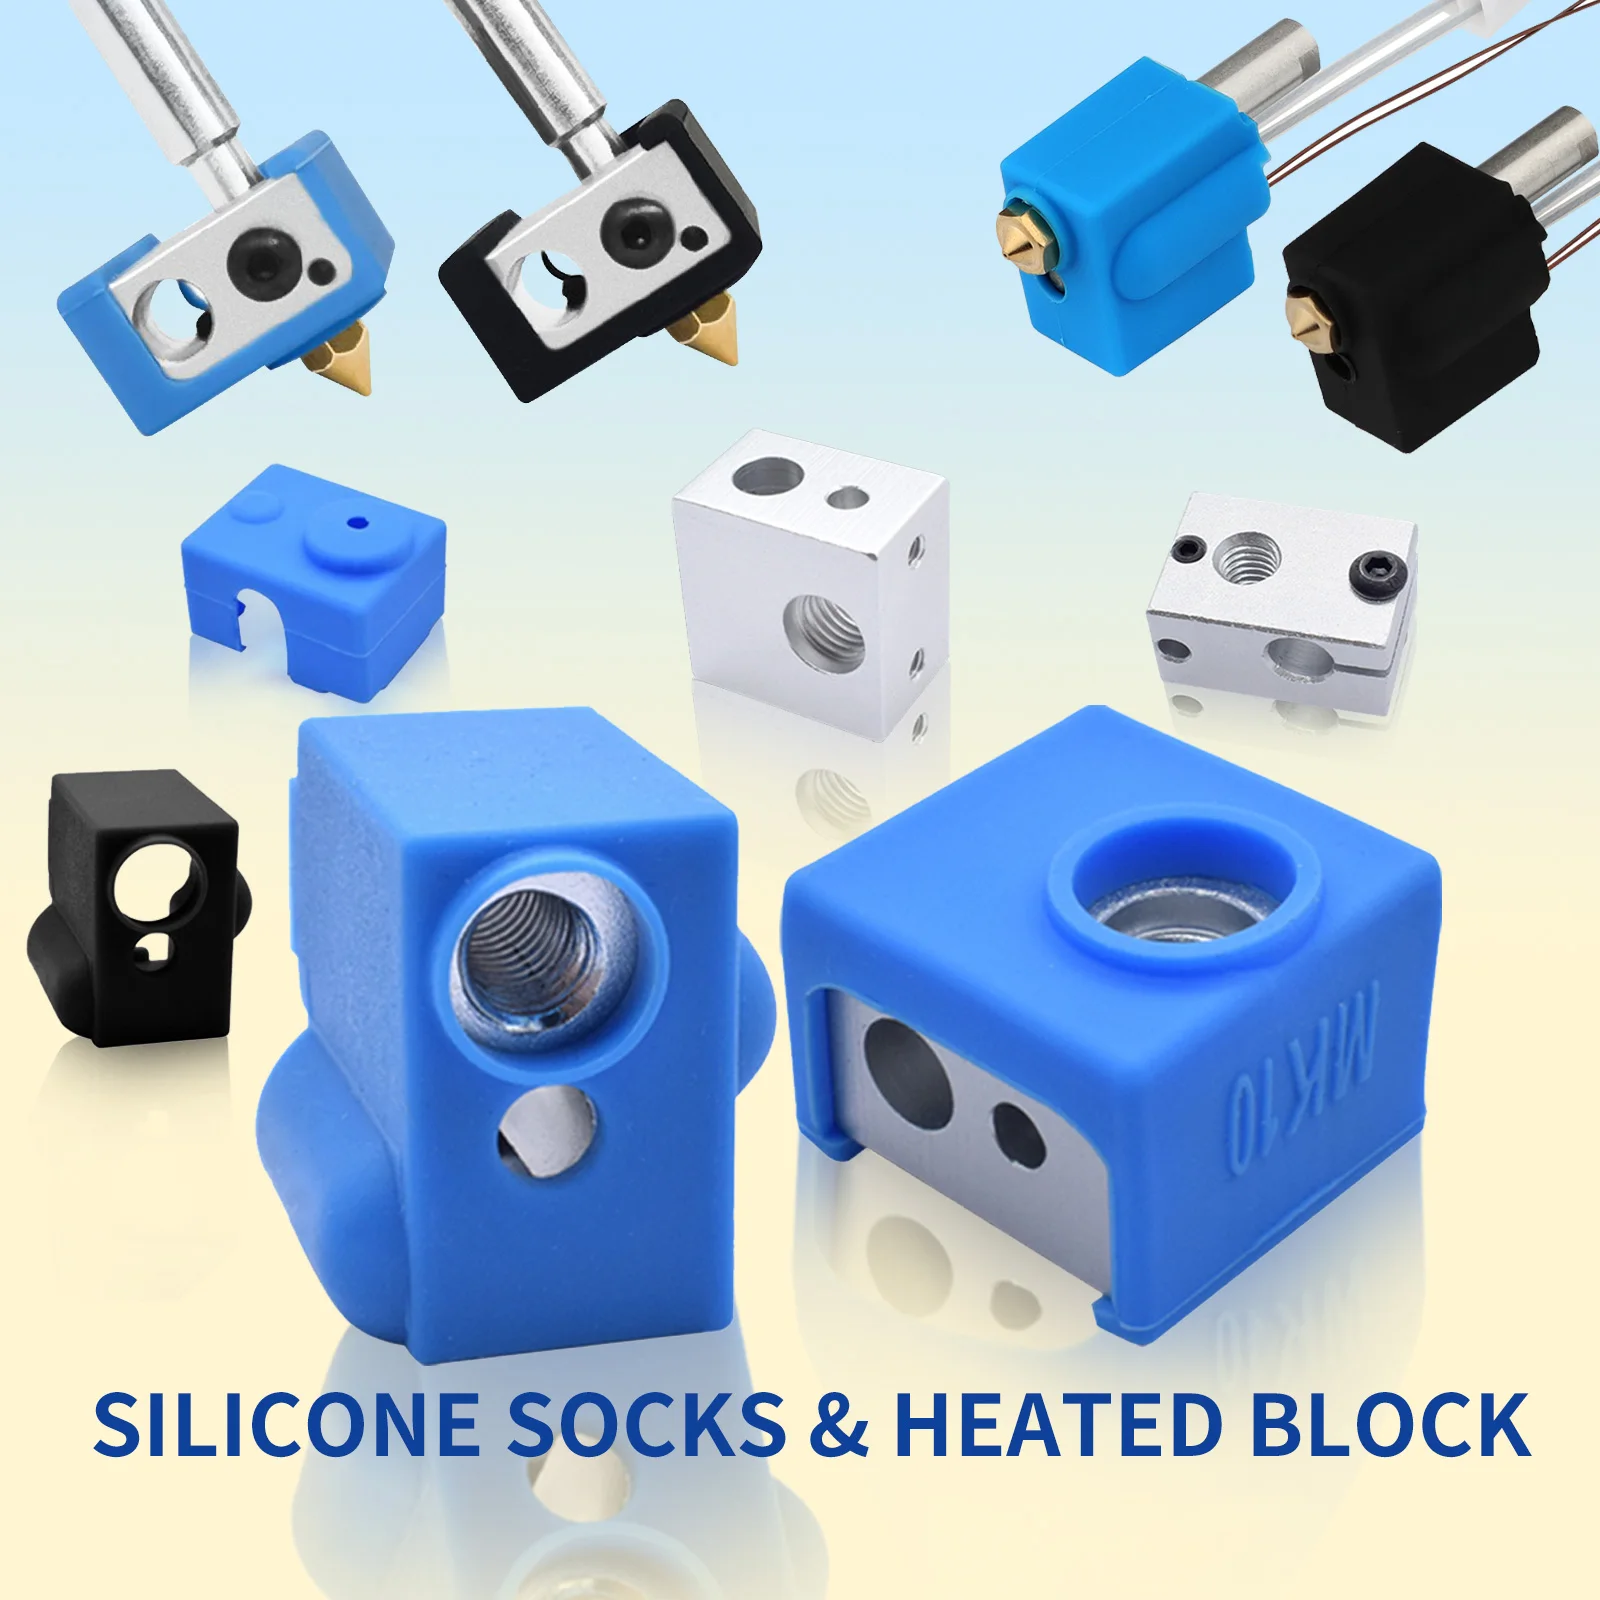 Silicone Socks For E3D V6/V5 MK8 MK9/MK10/Volnaco Heated Block Sleeve Hotend Protector Cover For 3D Printer Parts Heater Blocks 3d printer parts e3d v6 hotend heating accessories block for reprap makerbot extruder heated block kit 1